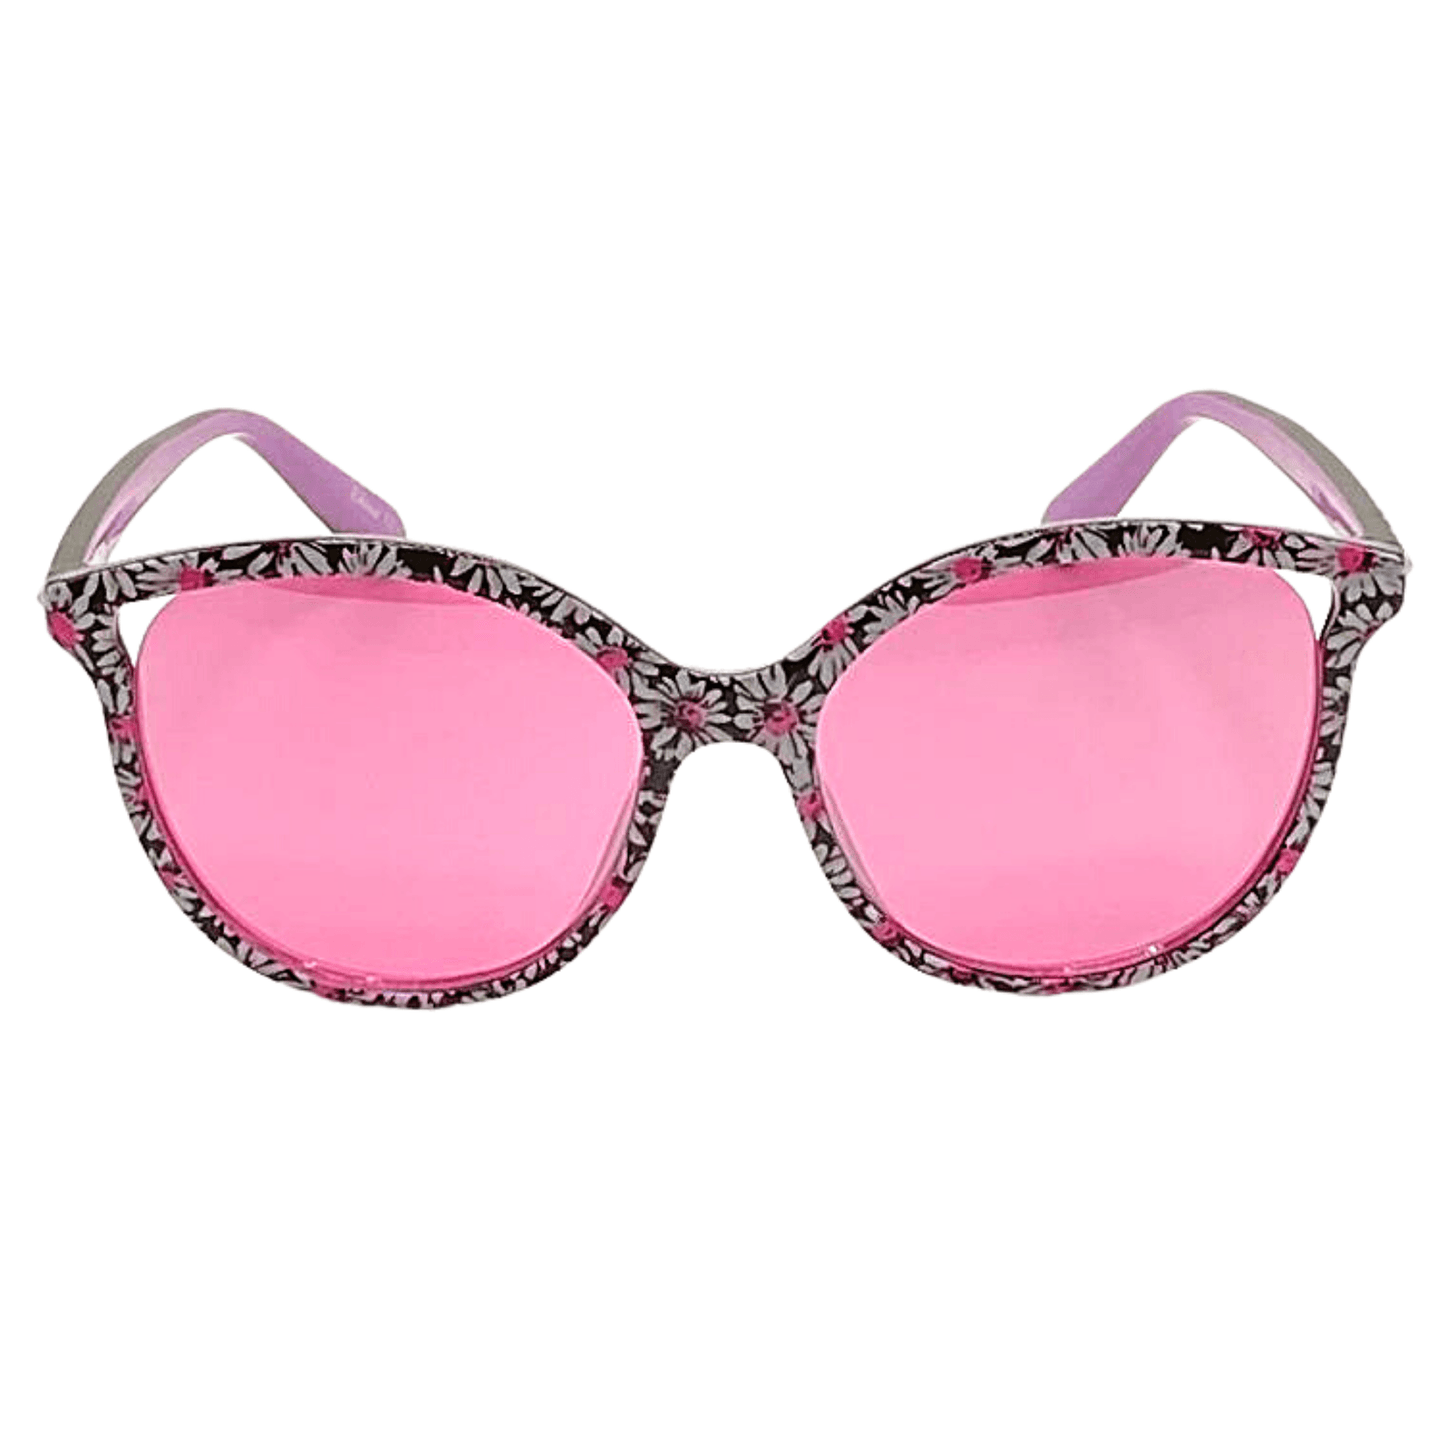 These adorable sunglasses are perfect for summer.  They feature pink lenses in a black frame with white daisies that have pink centers. 